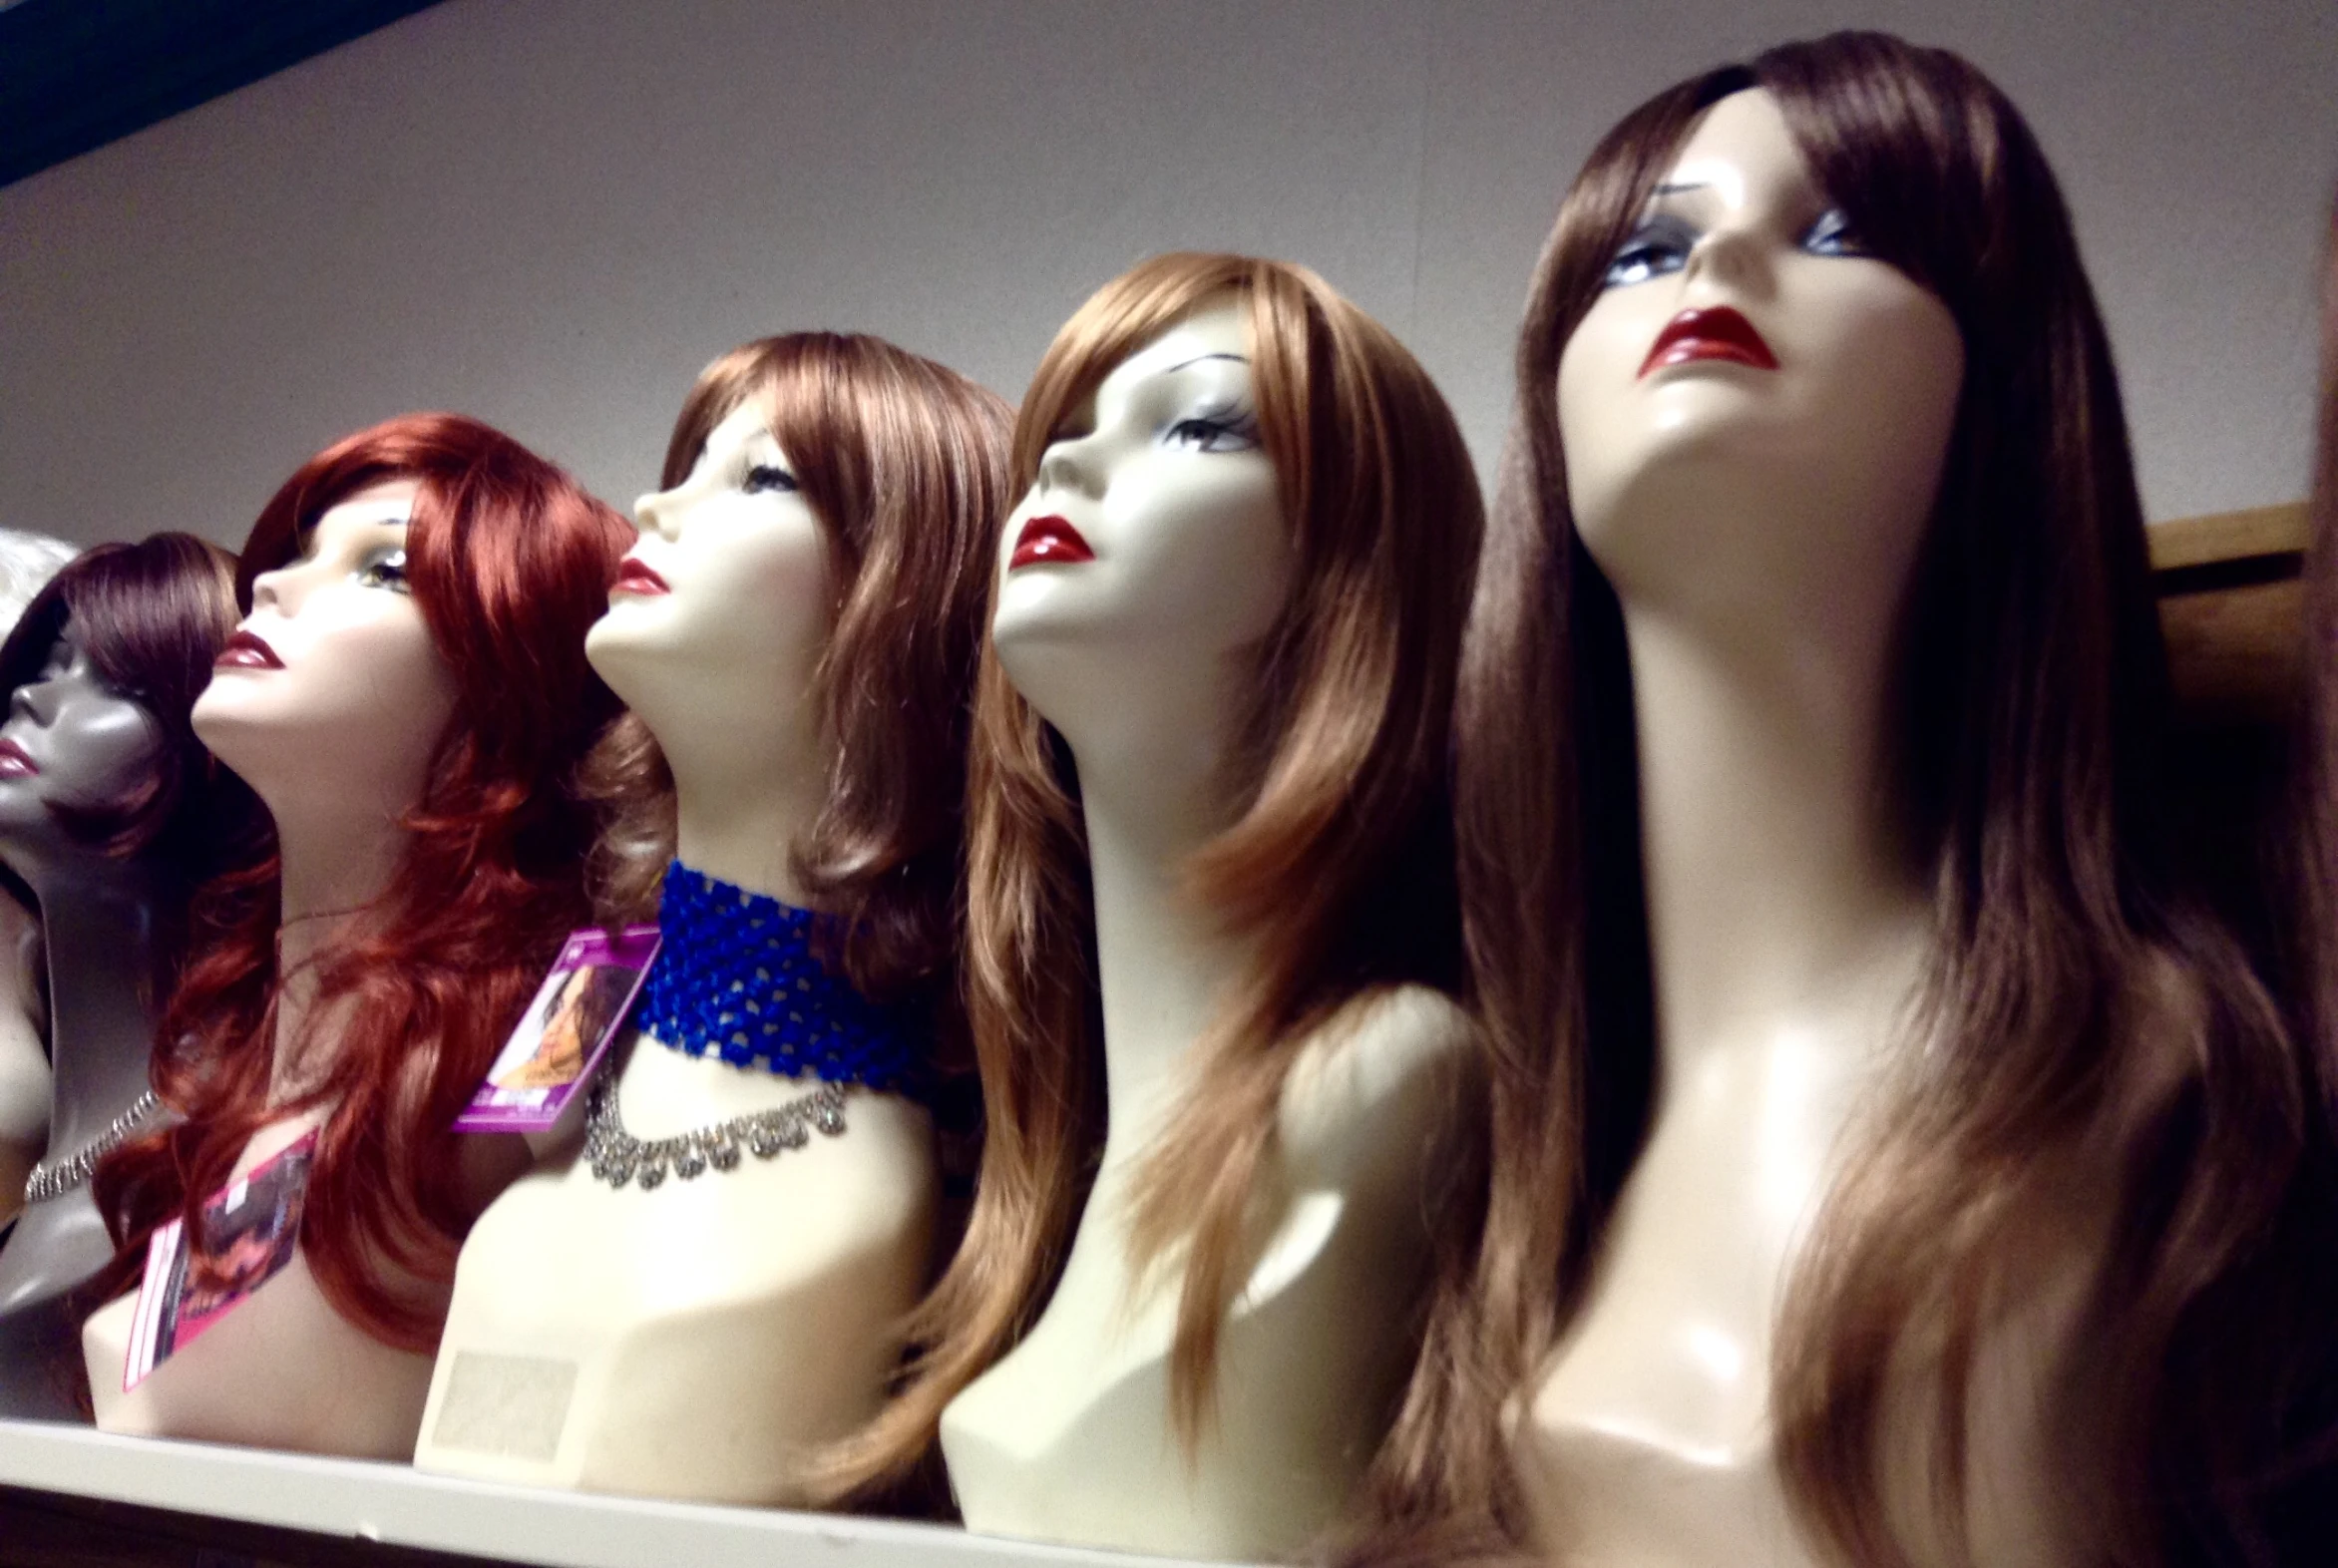 a large display of female mannequin heads on shelves